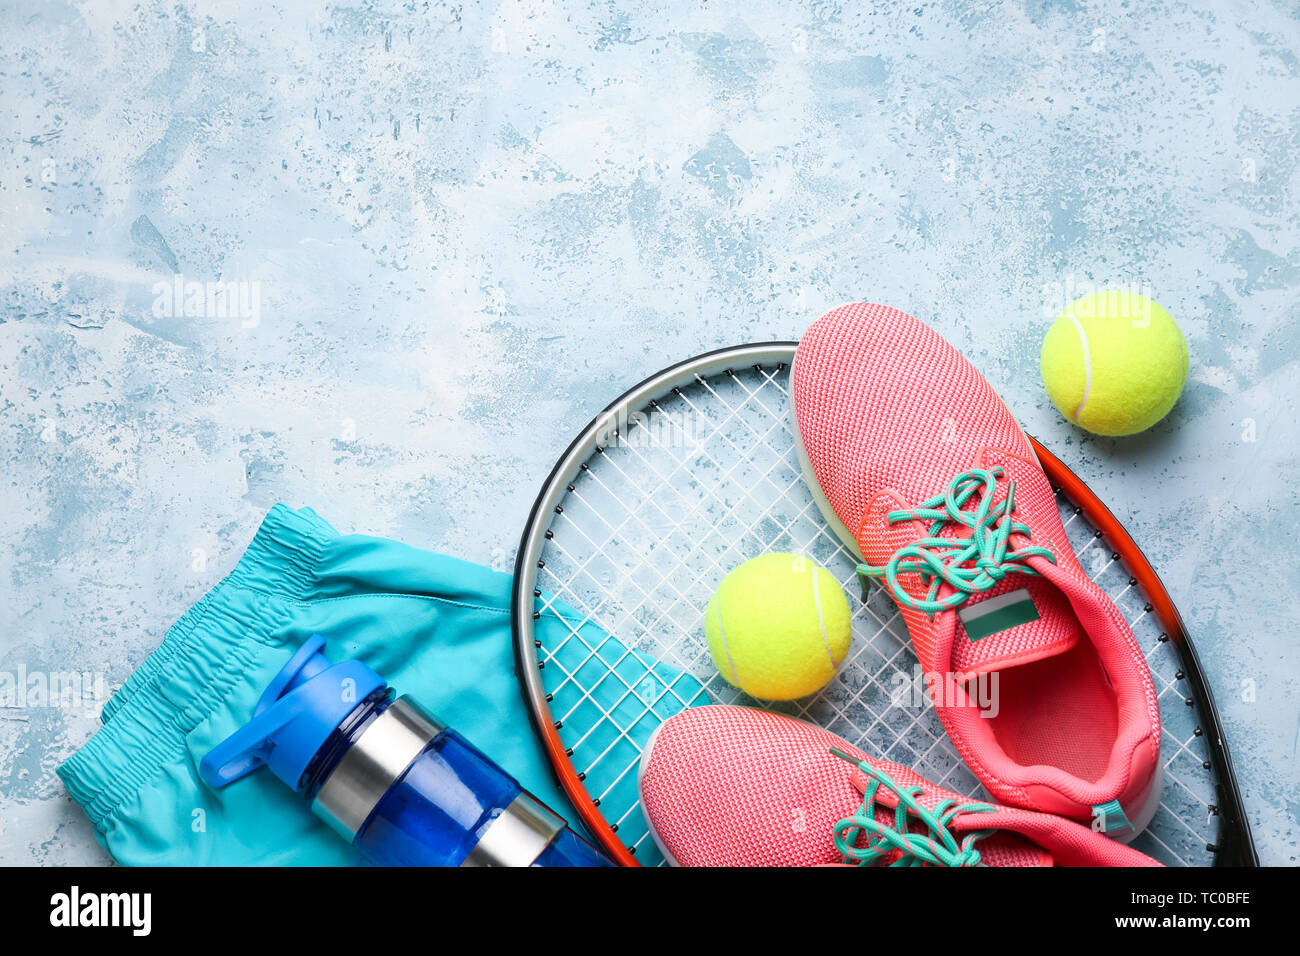 Tennis racket, shoes, clothes, bottle of water and balls on color background Stock Photo